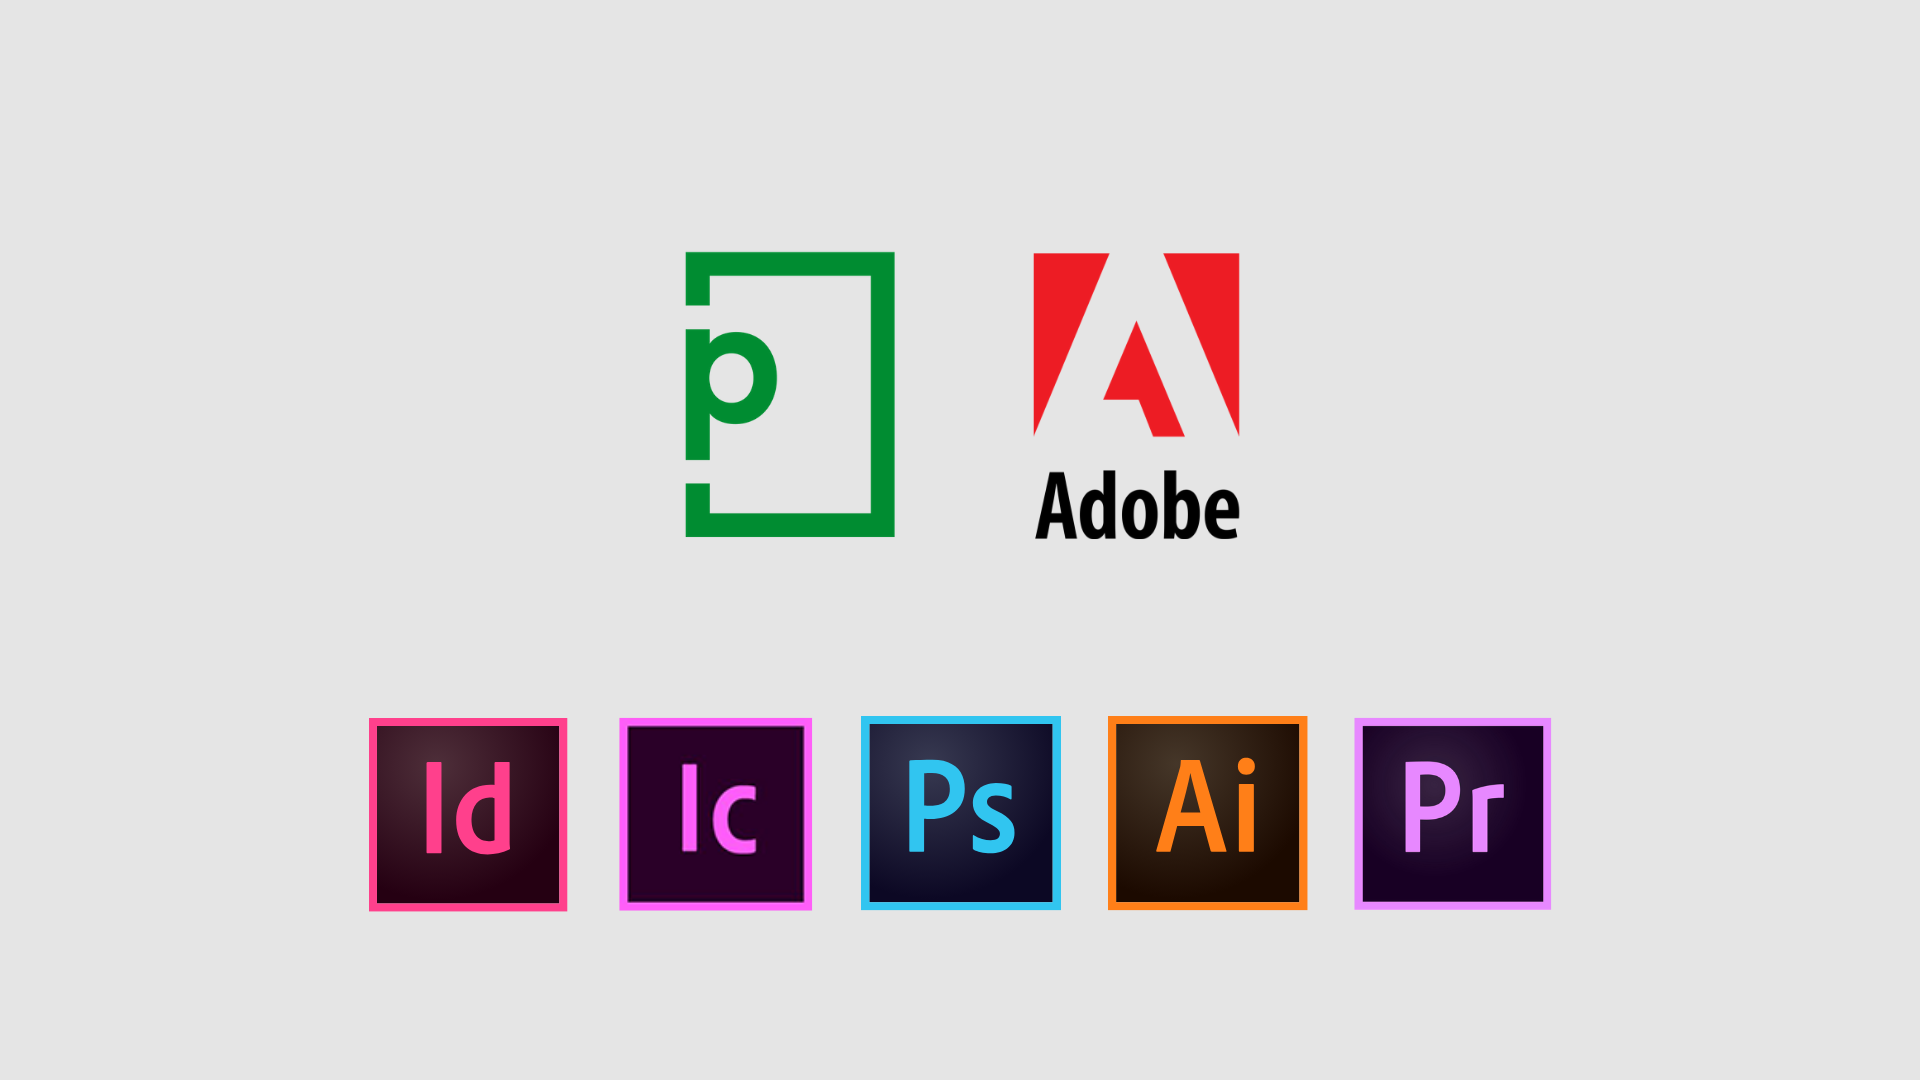 PageProof and Adobe Creative Cloud. Adobe InDesign, InCopy, Photoshop, Illustrator, Premiere Pro.